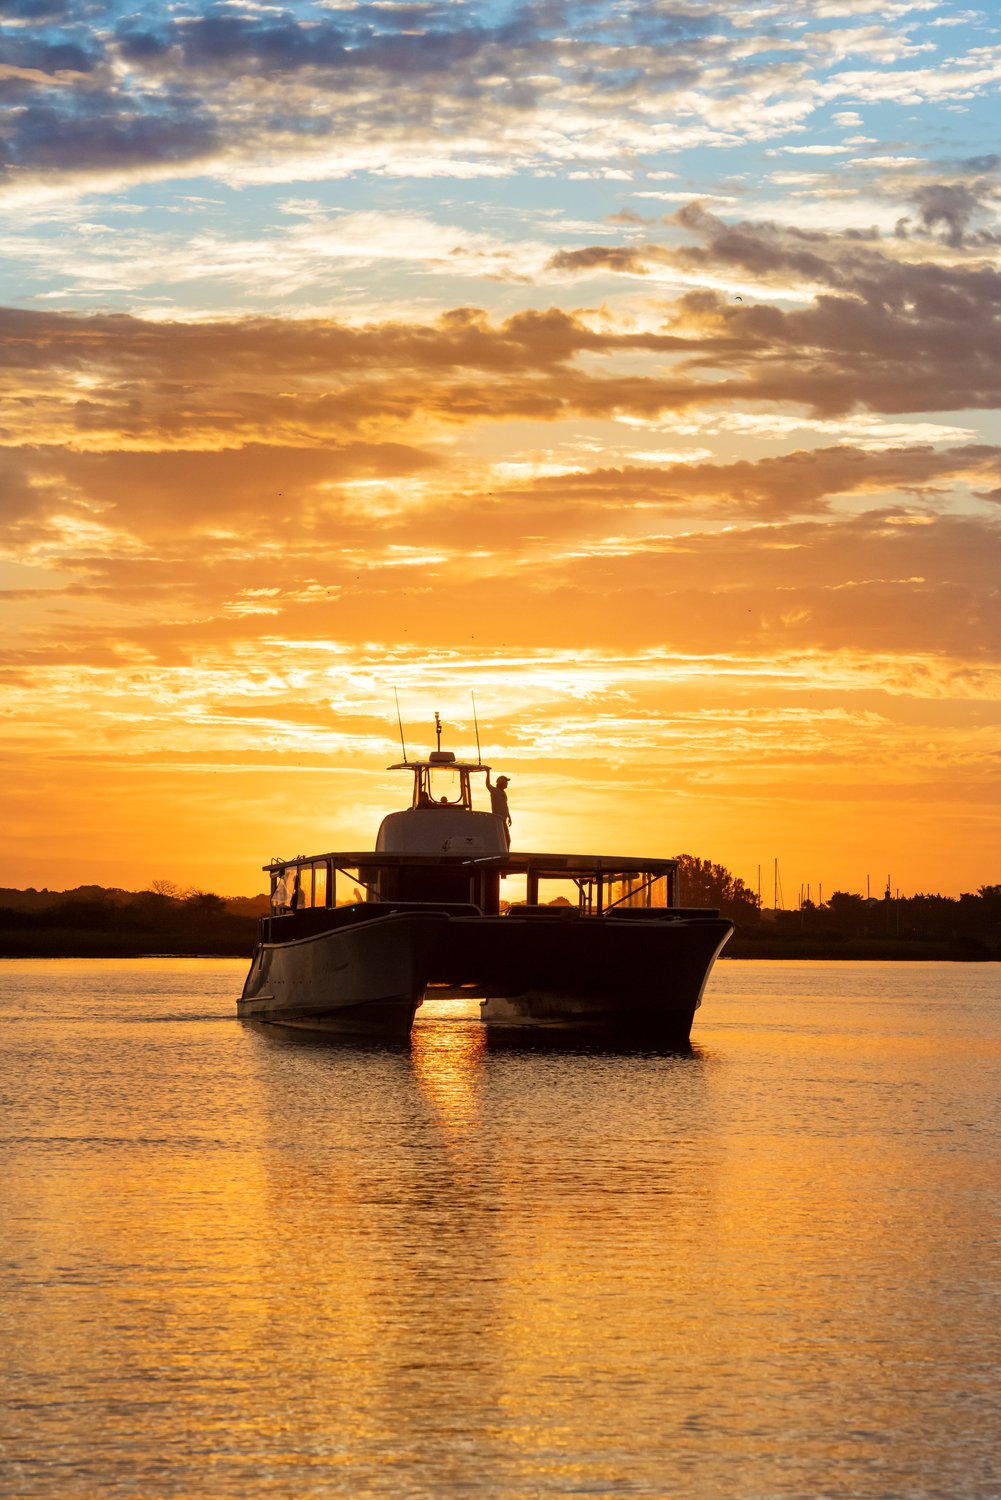 It’s another golden morning in Northeast Florida as Sabrage cruises placid waters.